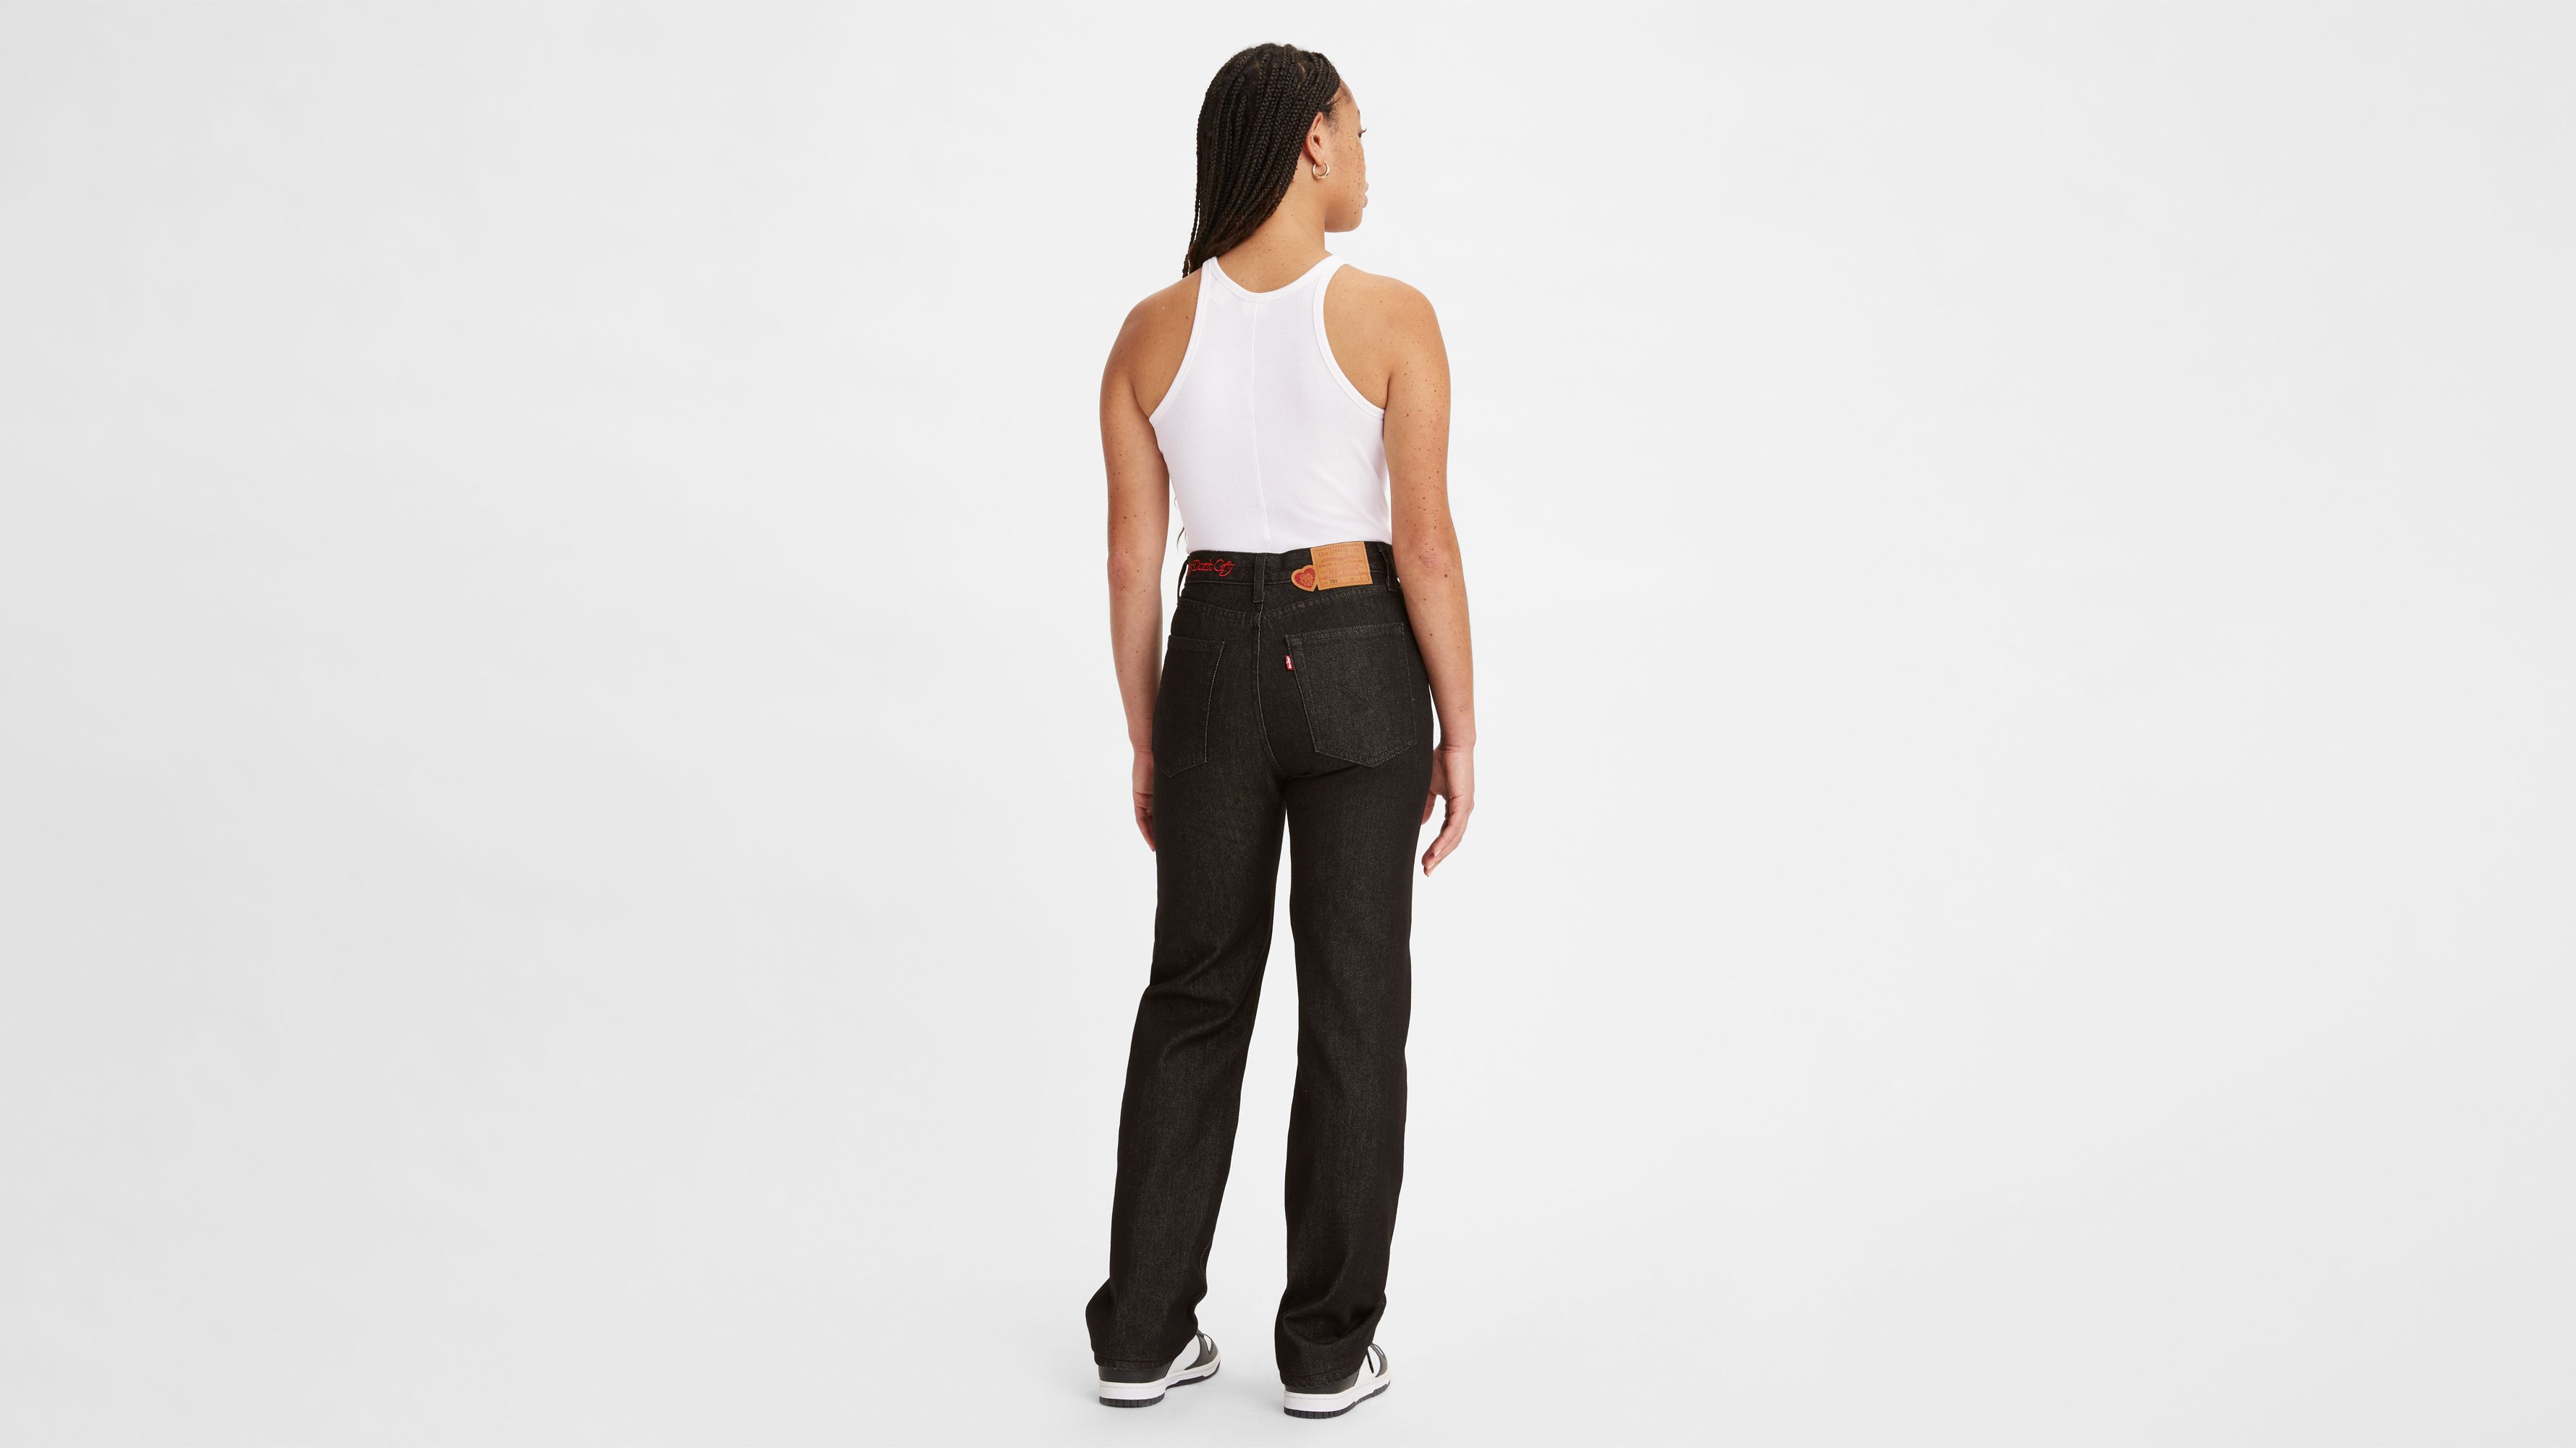 X Girls Don't Cry 701 Women's Jeans - Black | Levi's® US